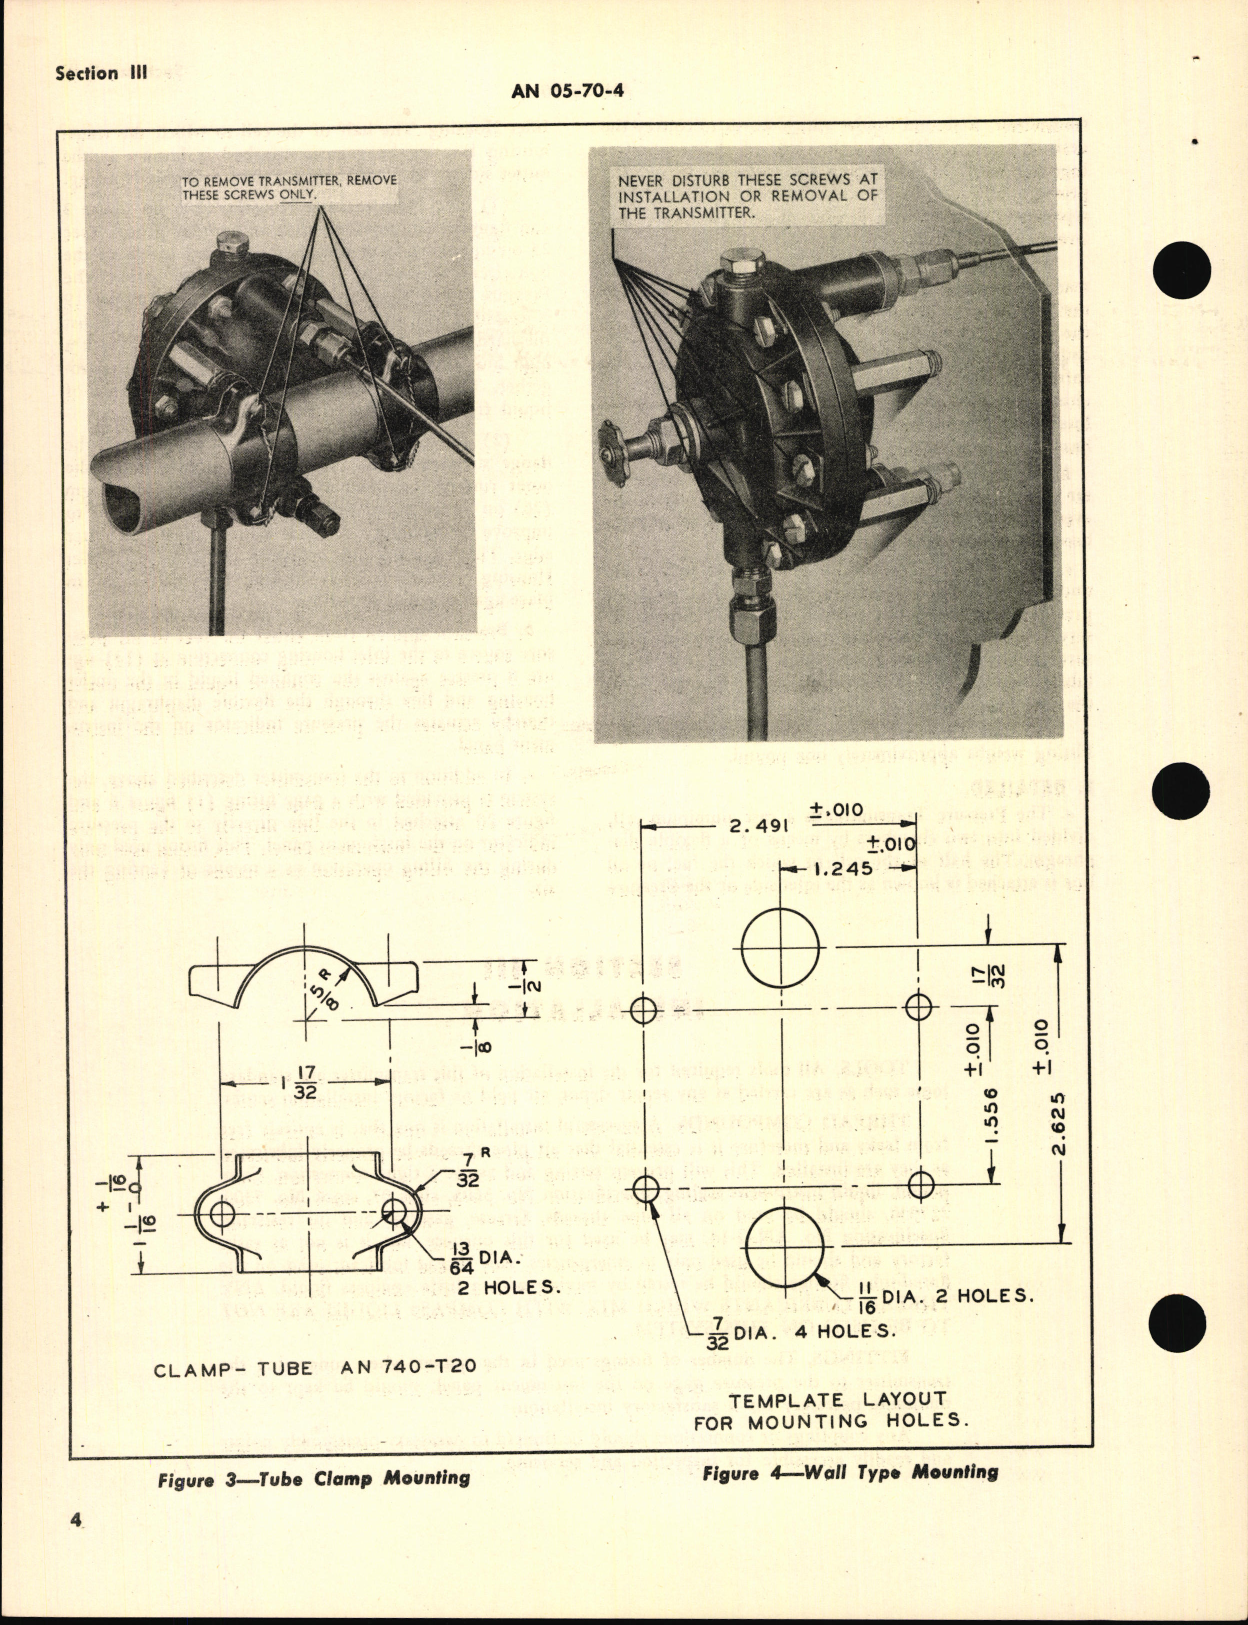 Sample page 8 from AirCorps Library document: Handbook of instructions with Parts Catalog for F.S.S.C. 88-T-2145 and A-1 Pressure Transmitter (Fuel & Oil)